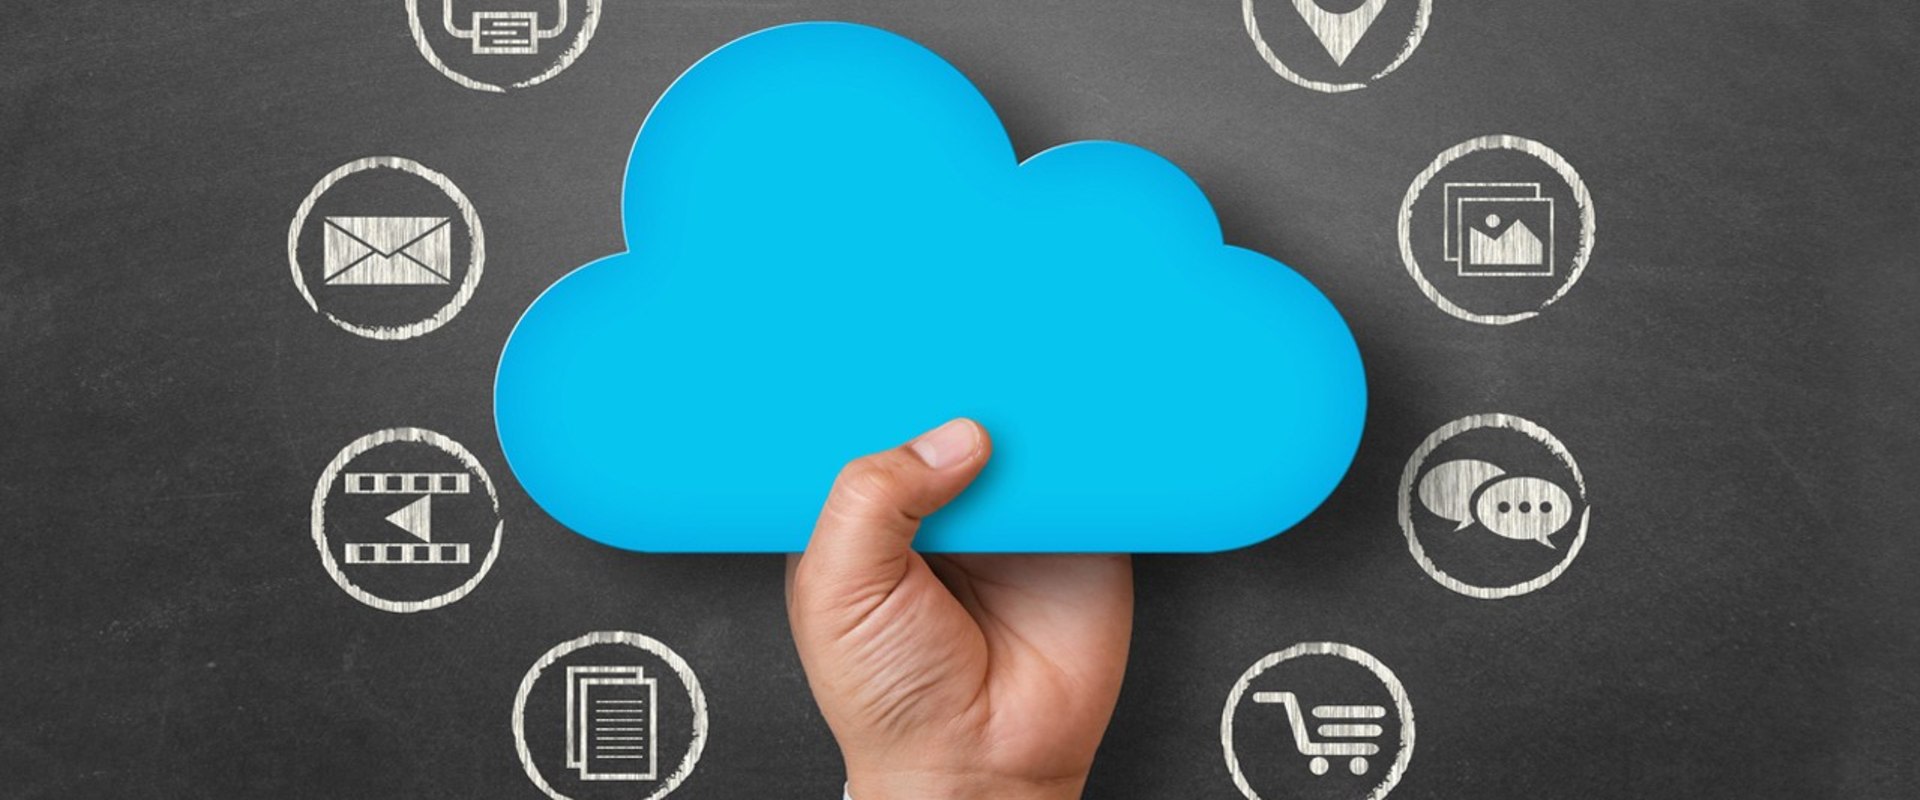 What is a Managed Service Provider and How Does it Relate to Cloud Services?